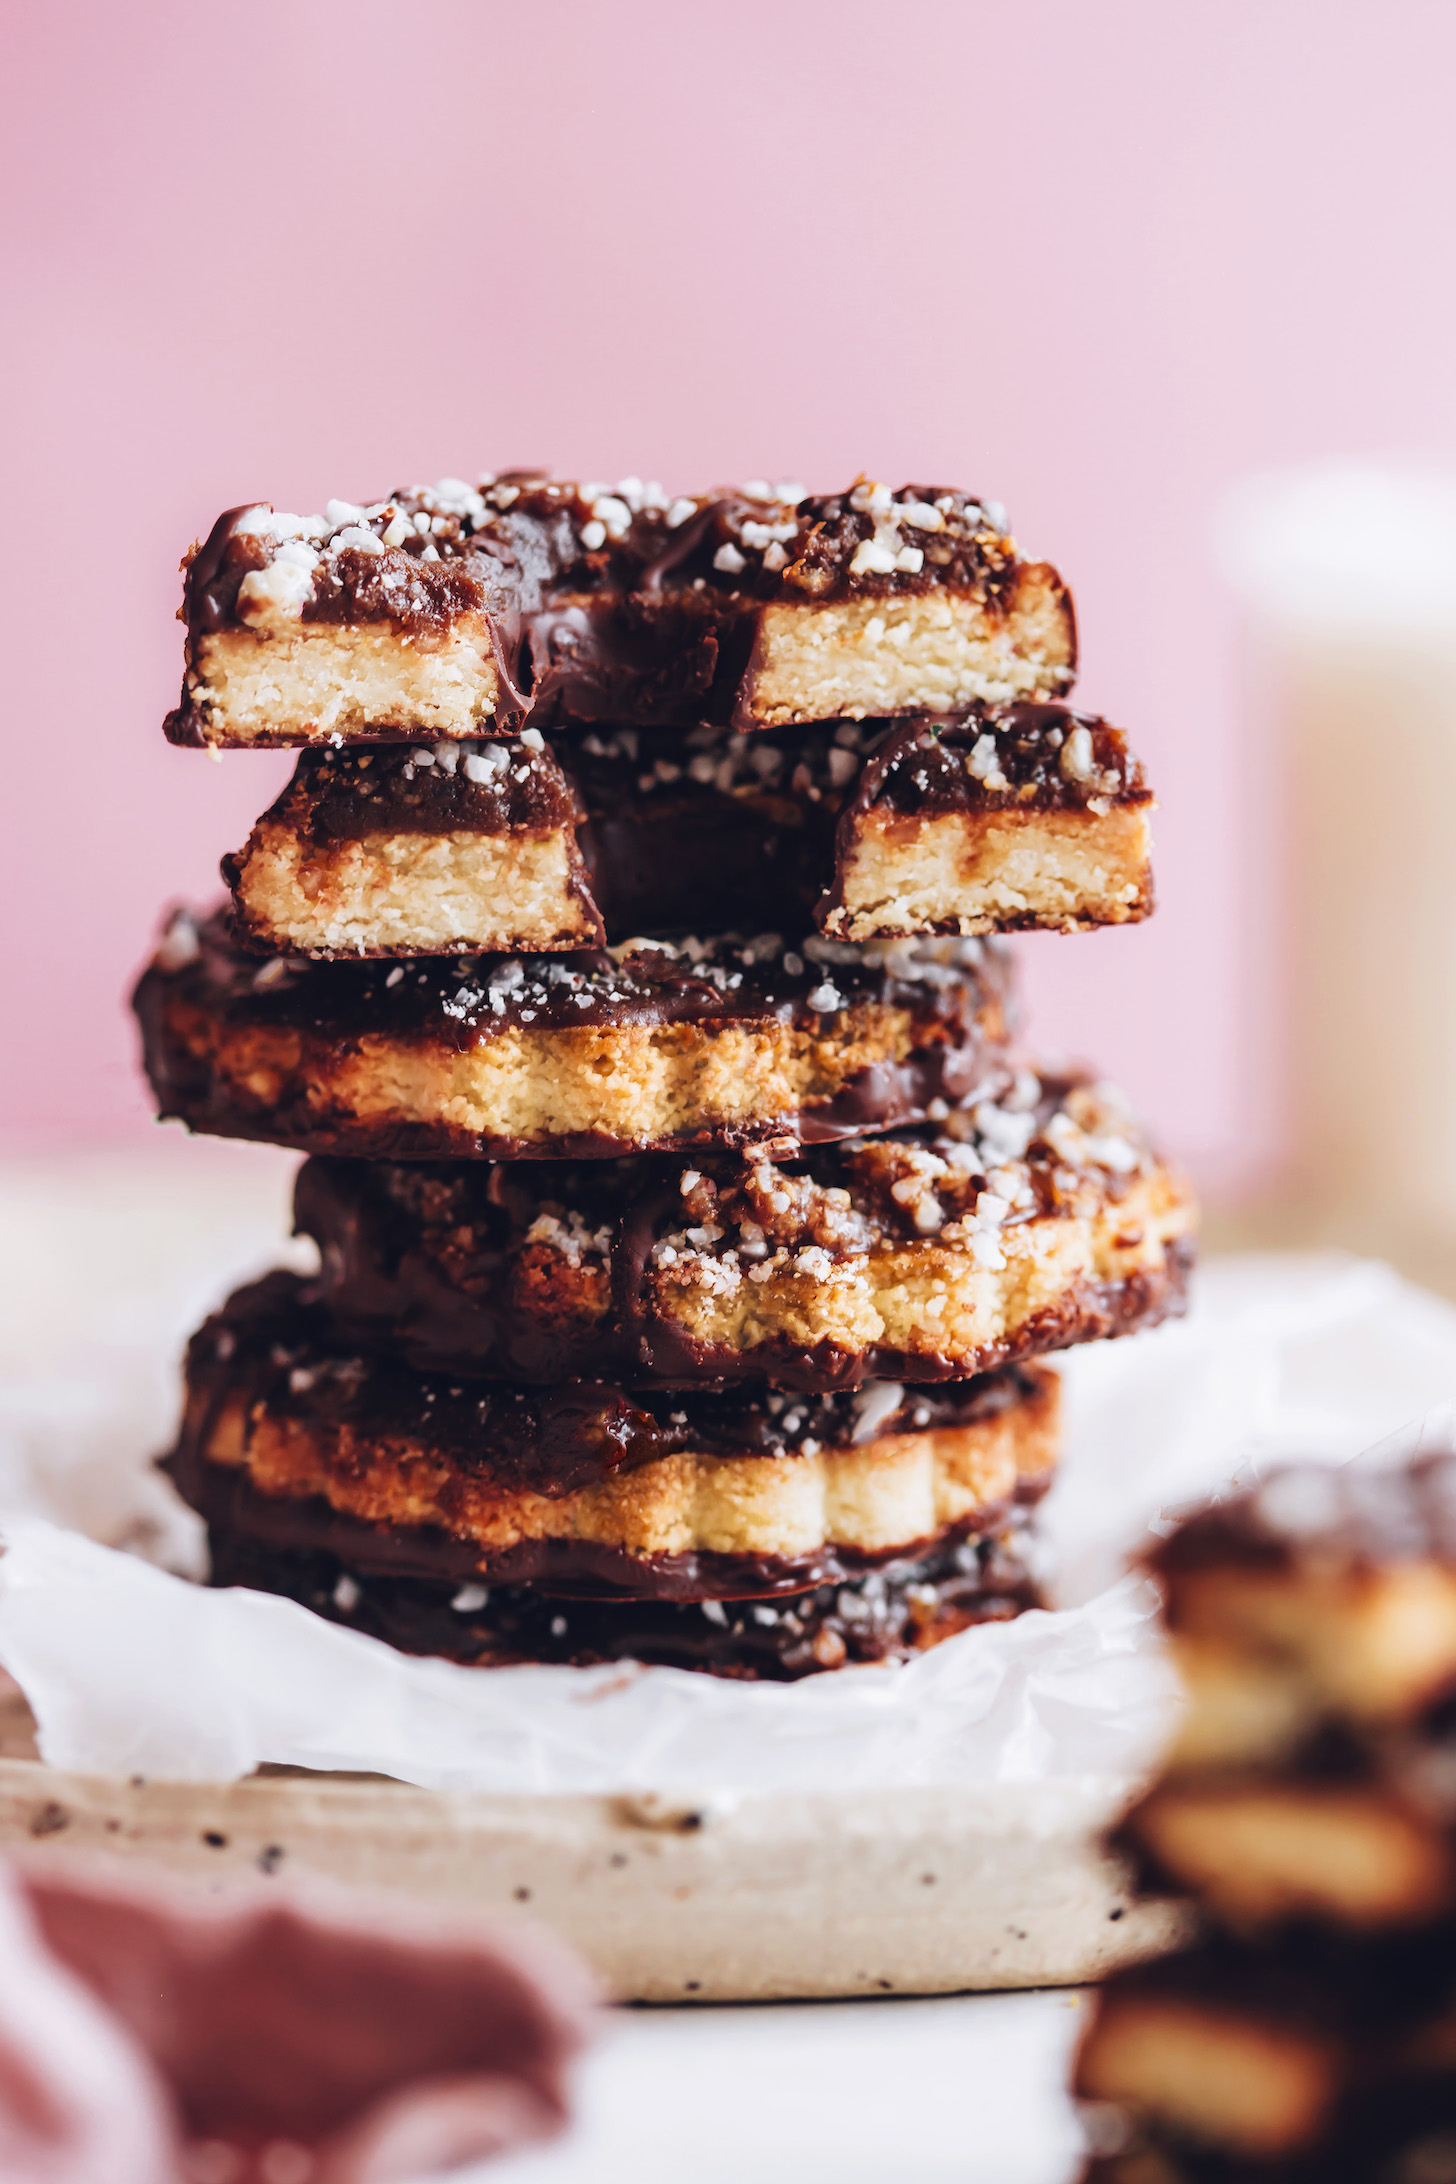 Stack of vegan gluten-free samoa cookies made with caramel, chocolate, and shredded coconut